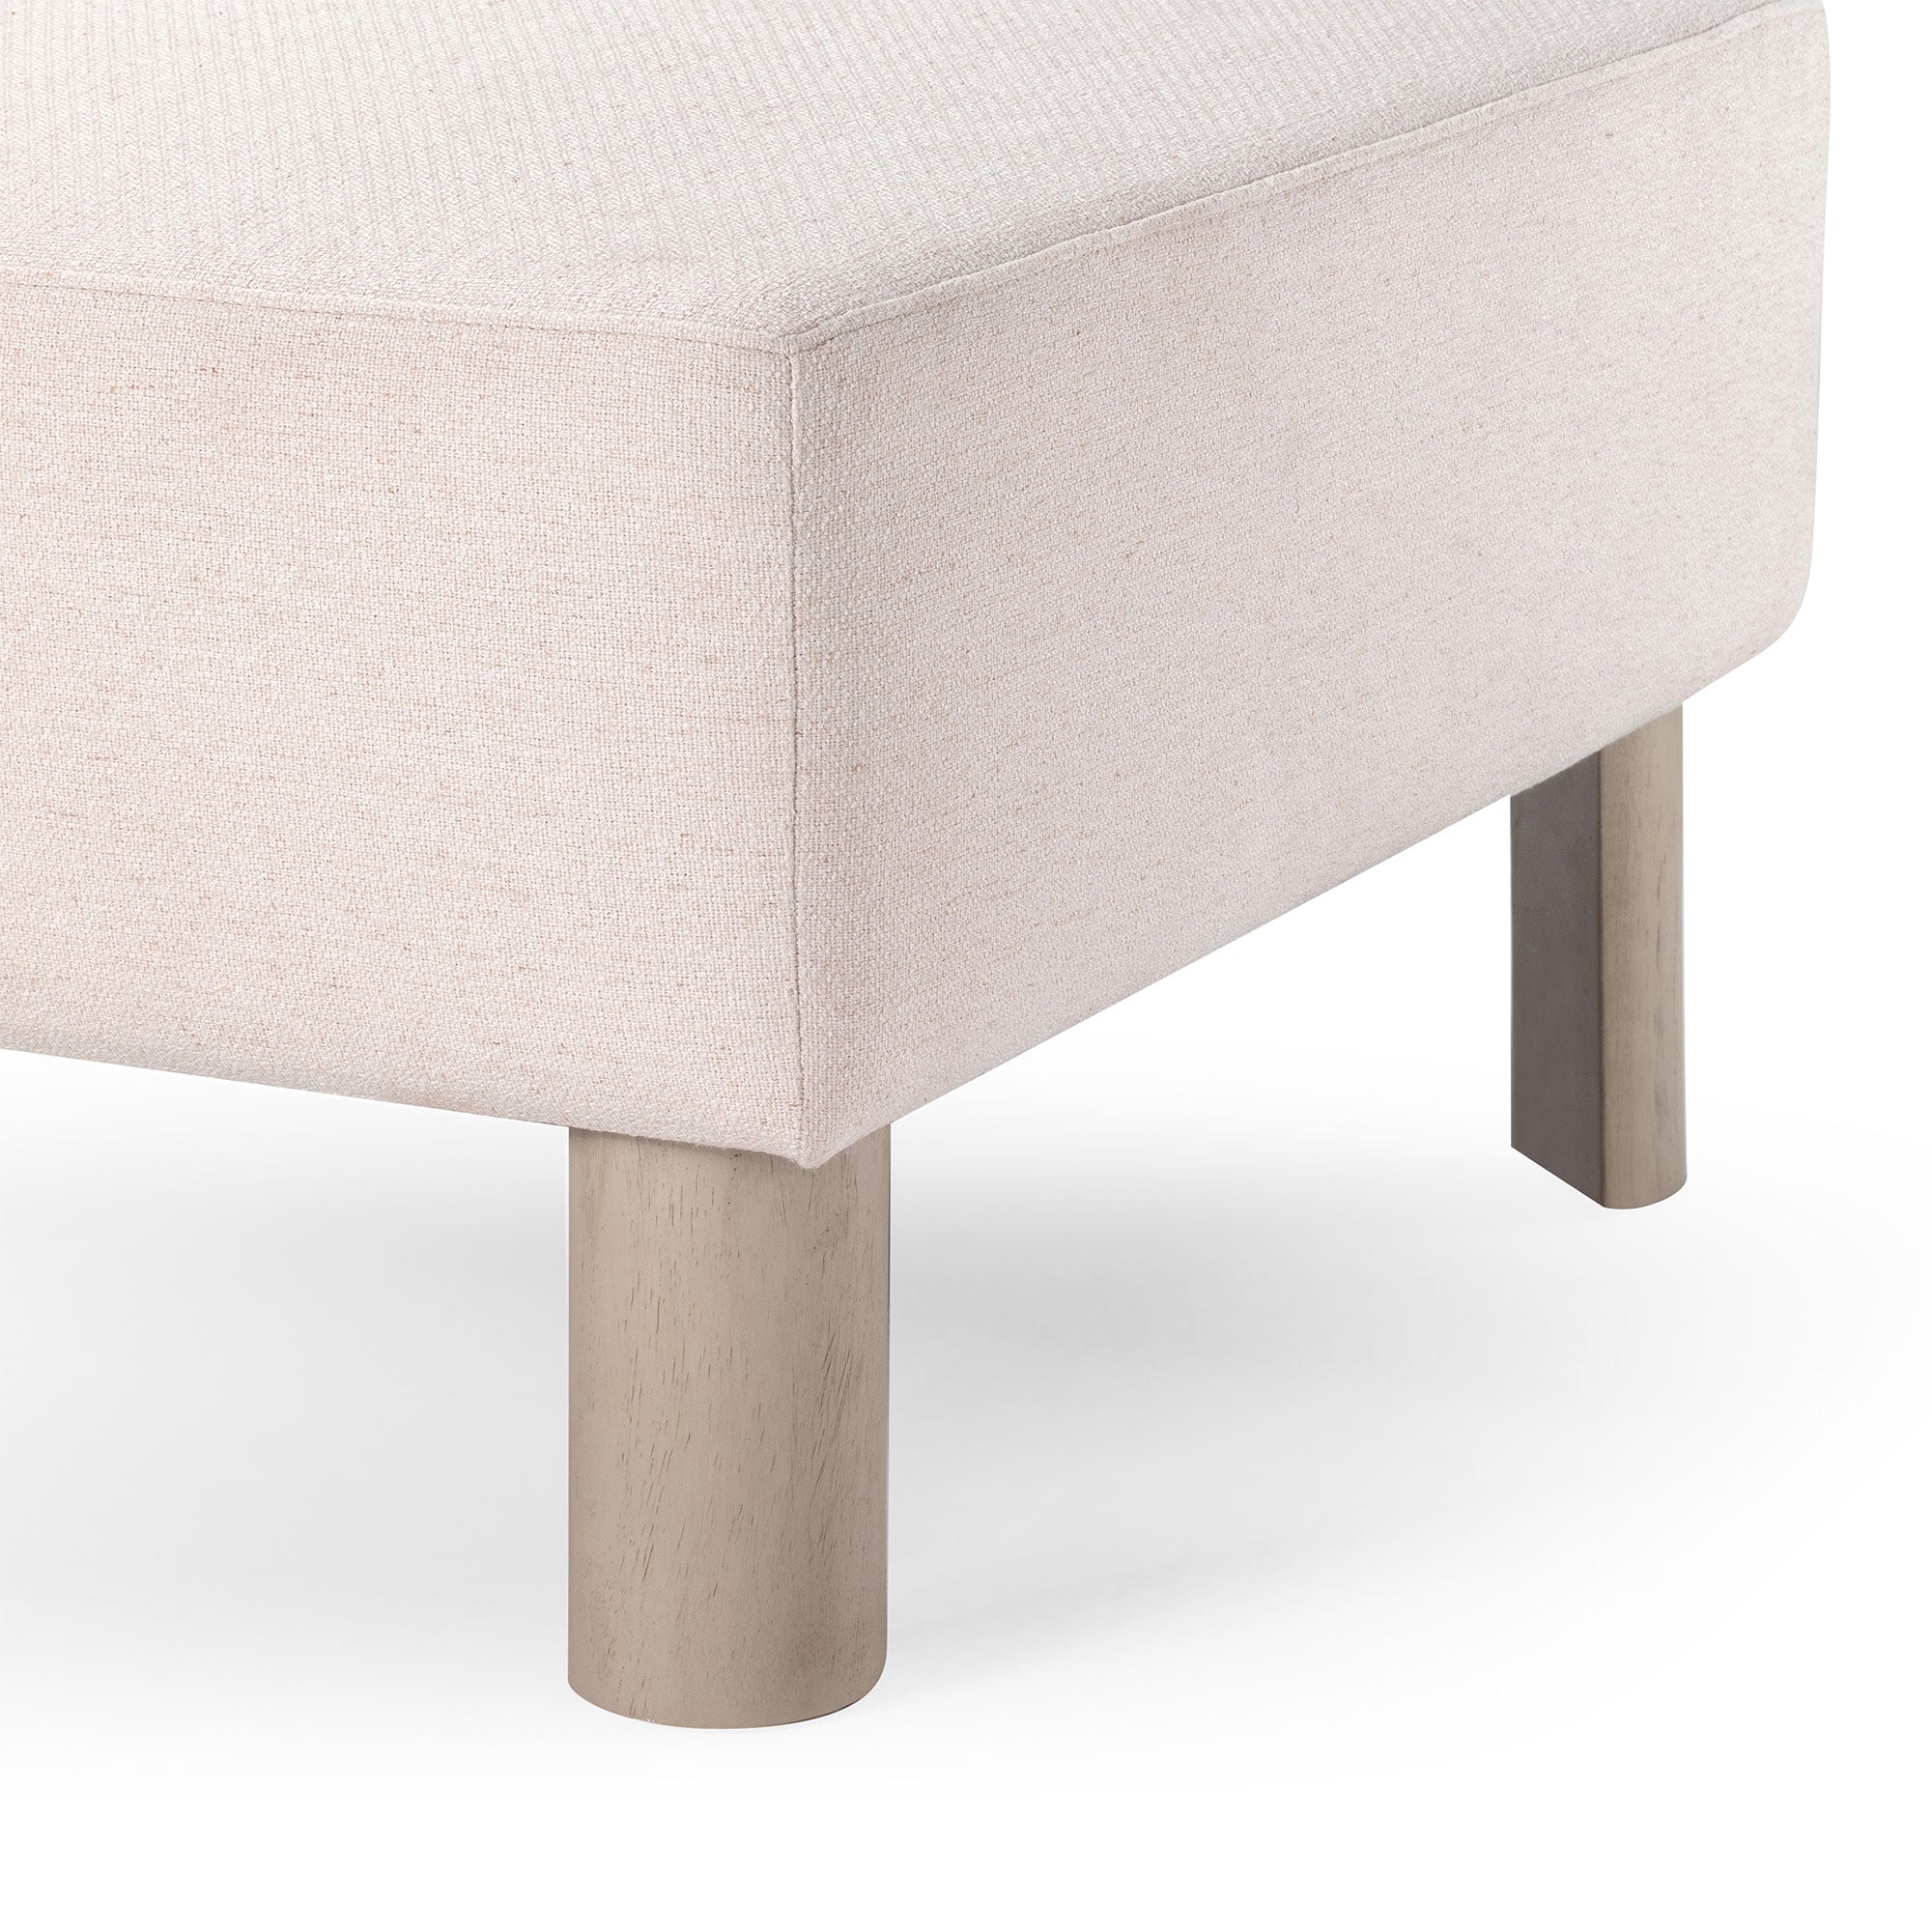 Lena Contemporary Upholstered Ottoman with Refined White Wood Finish in Ottomans & Benches by Maven Lane